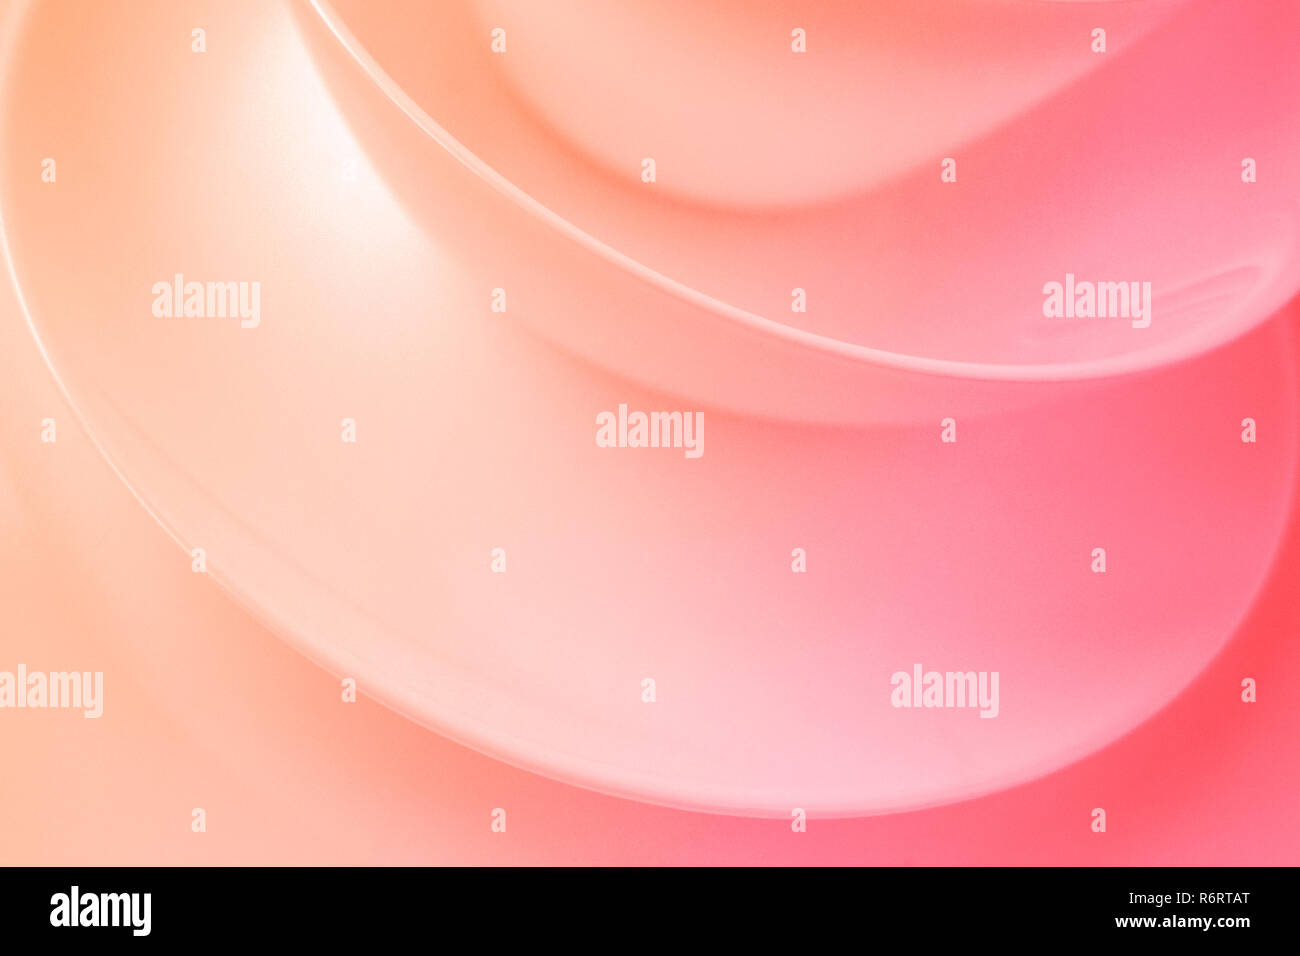 Abstract background with smooth lines in coral color. Living coral color of the Year 2019. Stock Photo